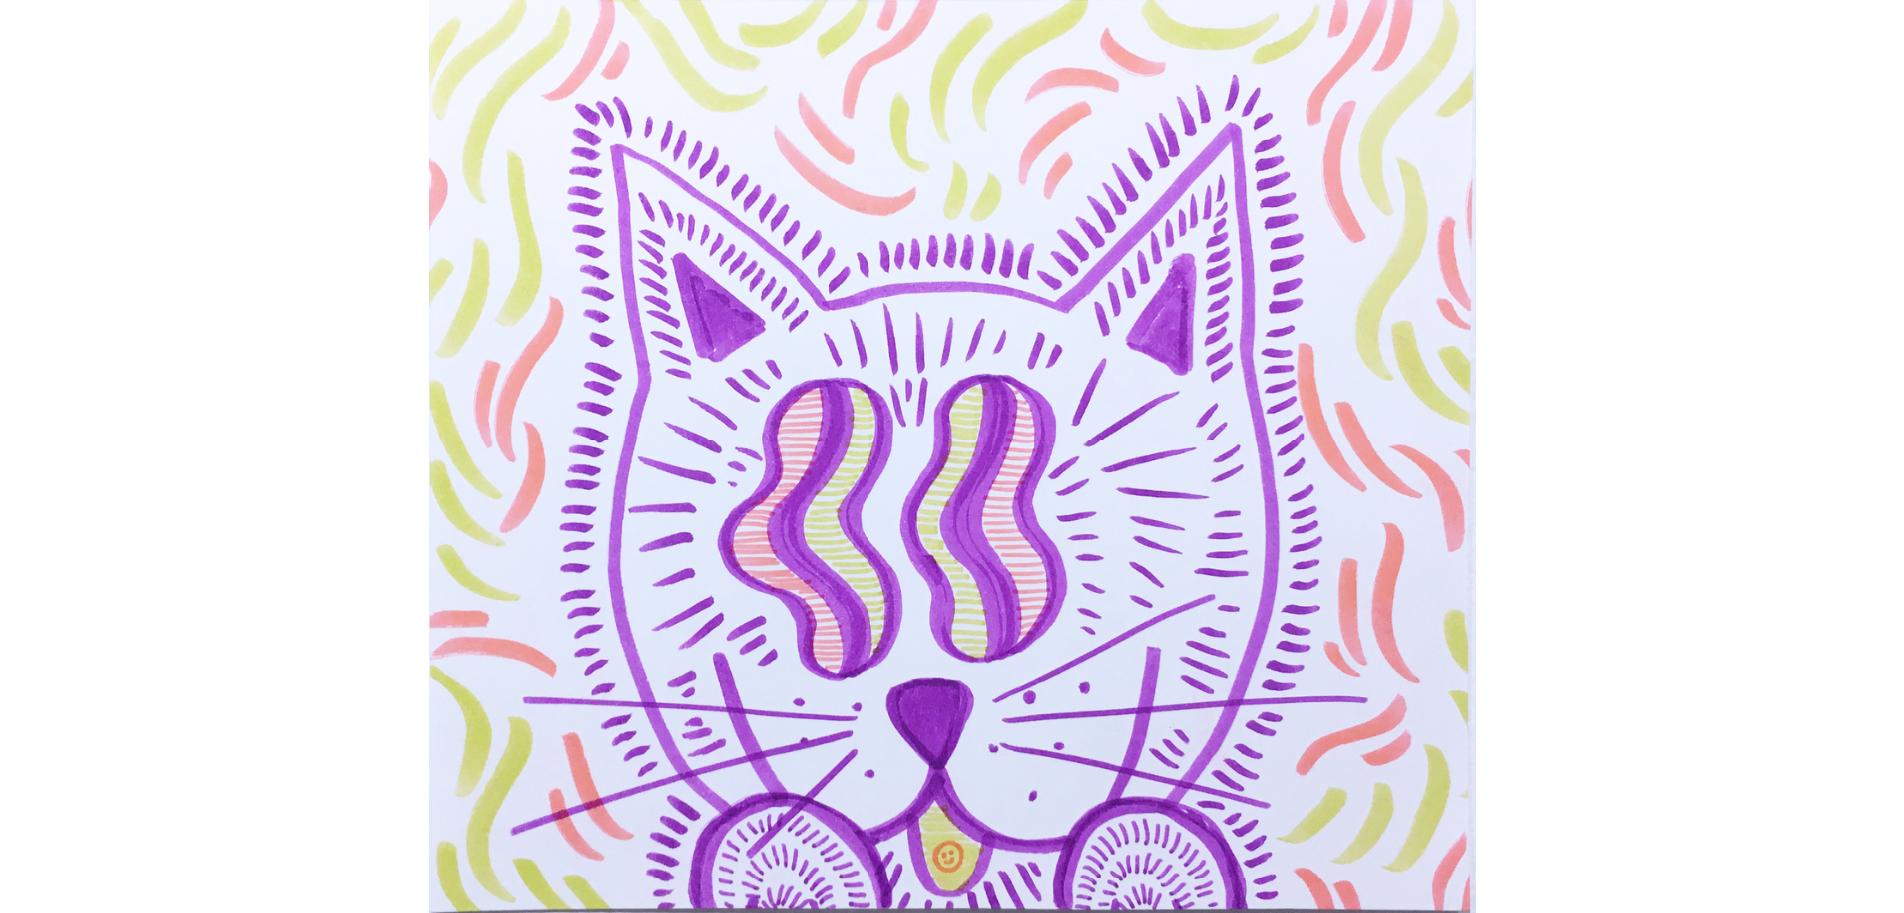 Bonus Kitty, Watercolor Paper Drawing, Pop Art, Cat with Graphic Wavy Pattern - Gray Figurative Art by SarahGrace